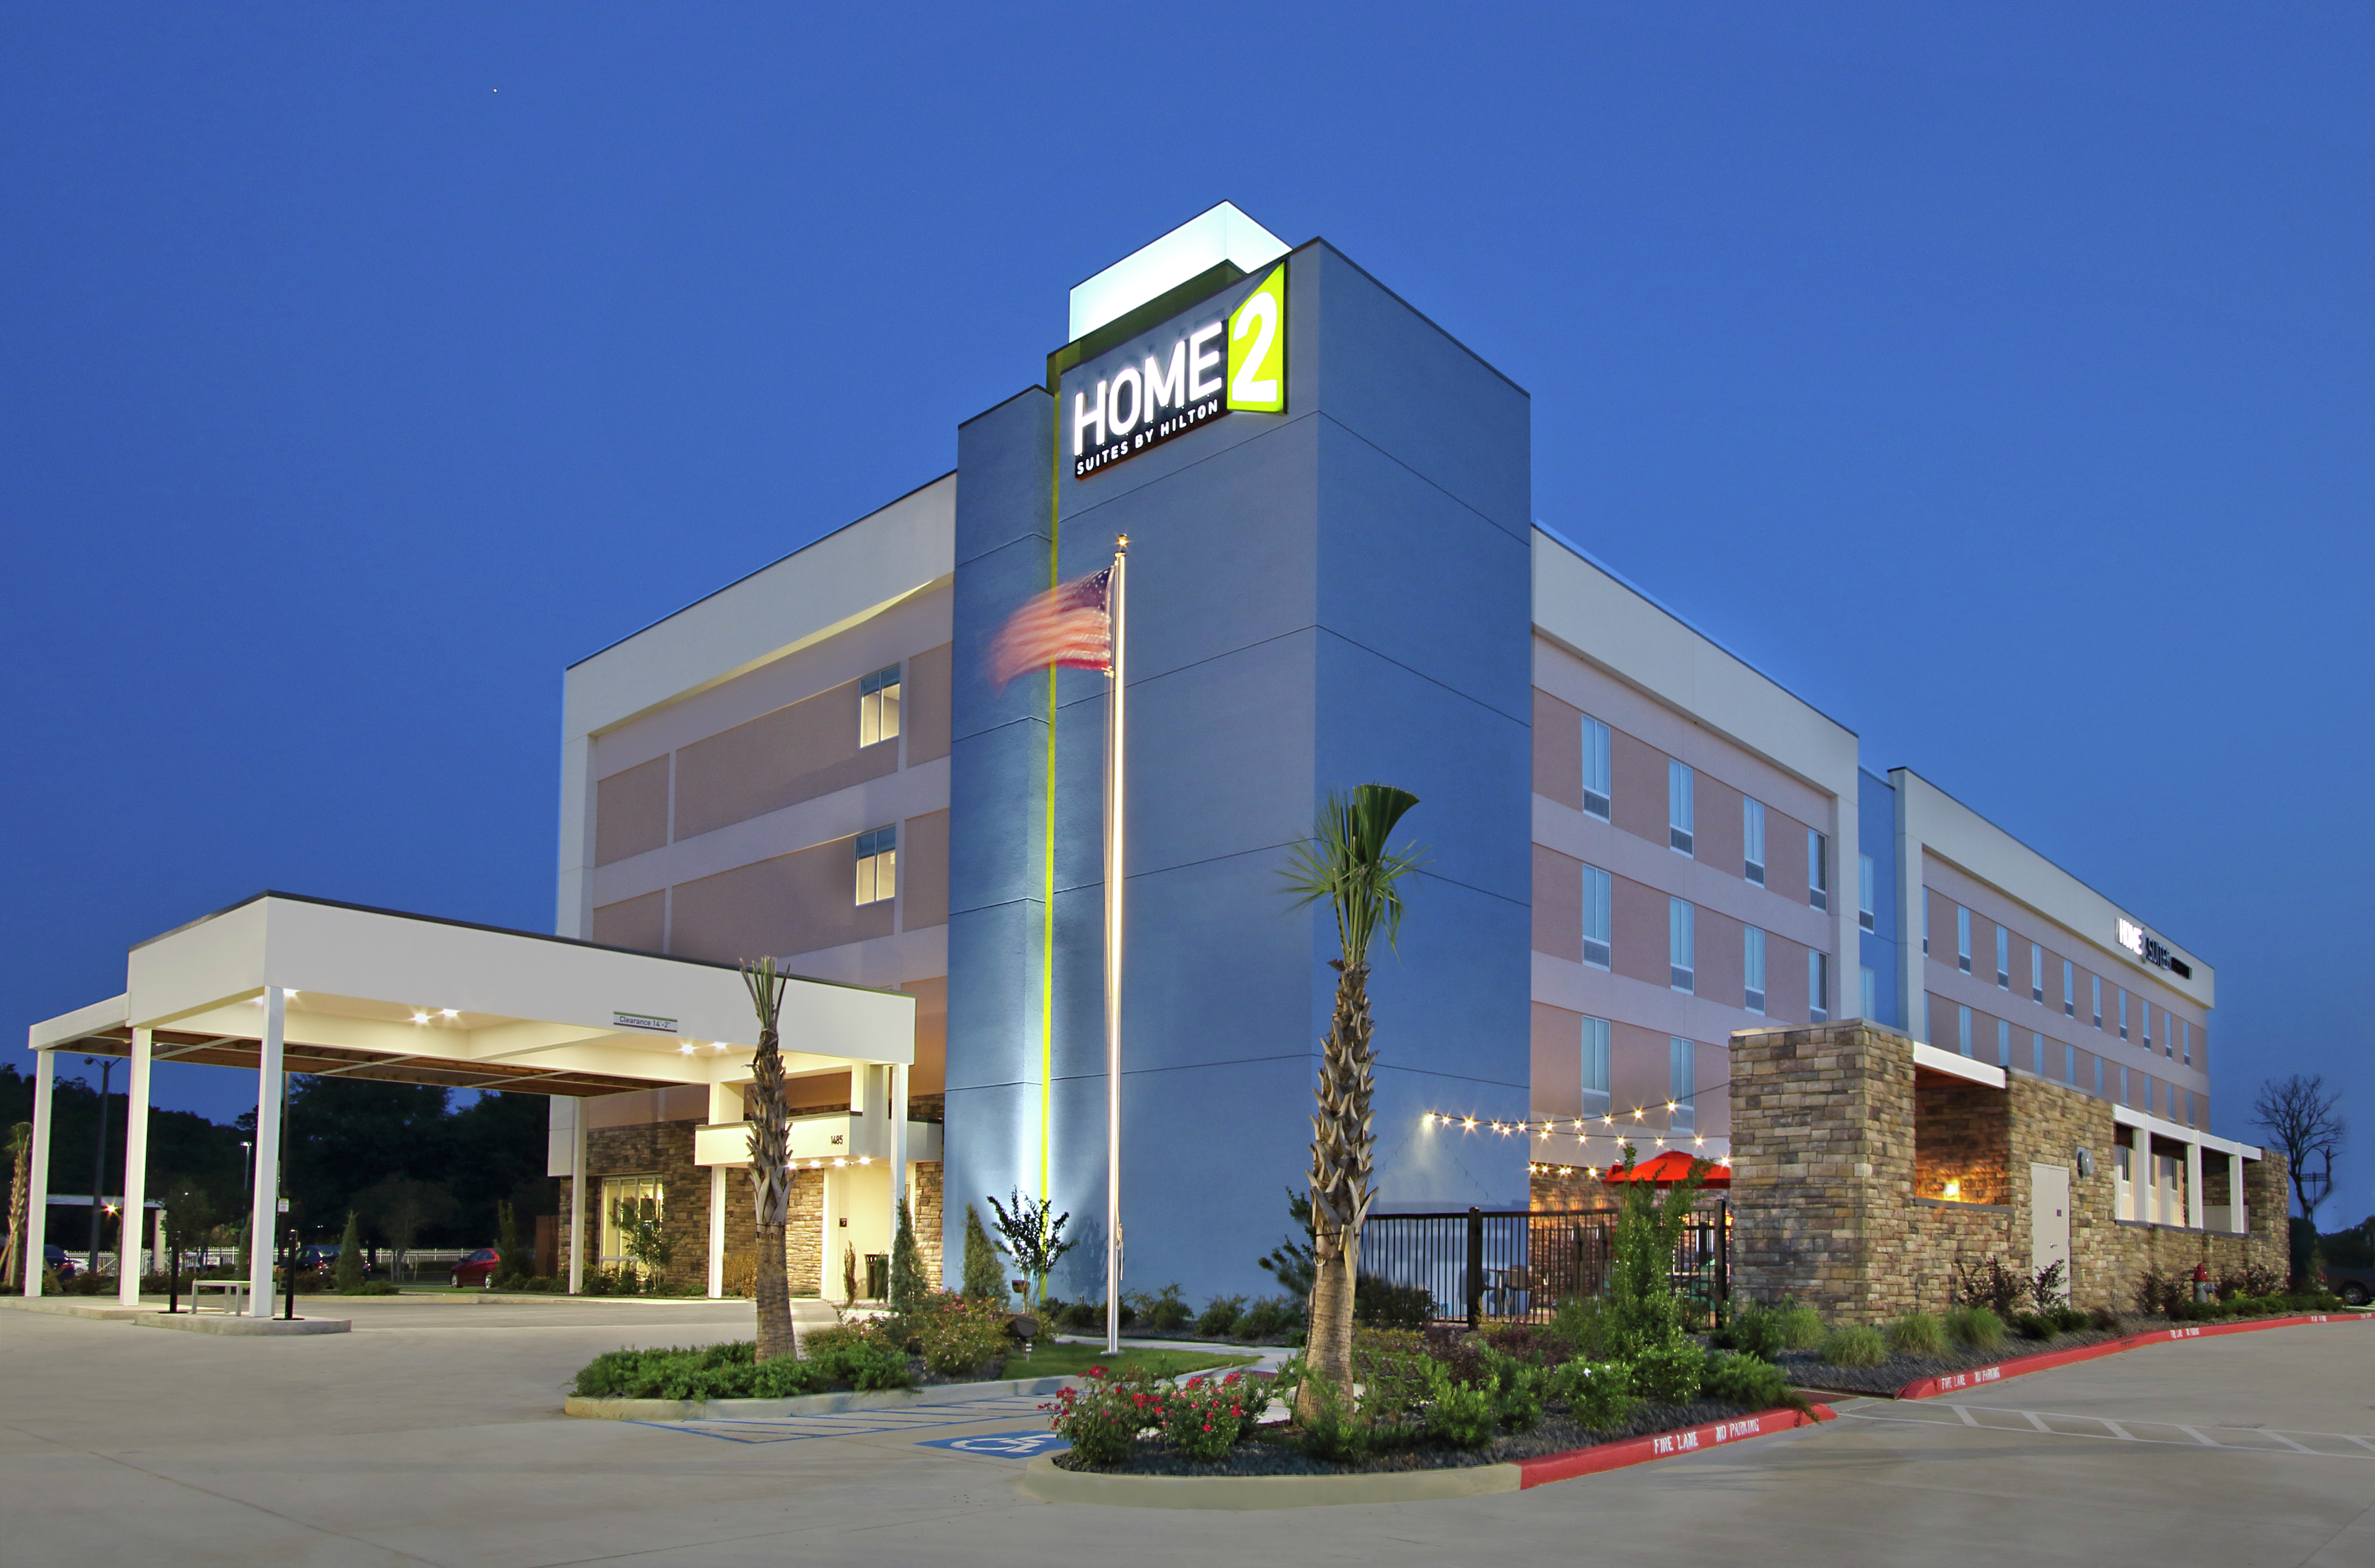 Illuminated Hotel Exterior With Signage, Porte Cochère, Flagpole, and Landscaping at Dusk